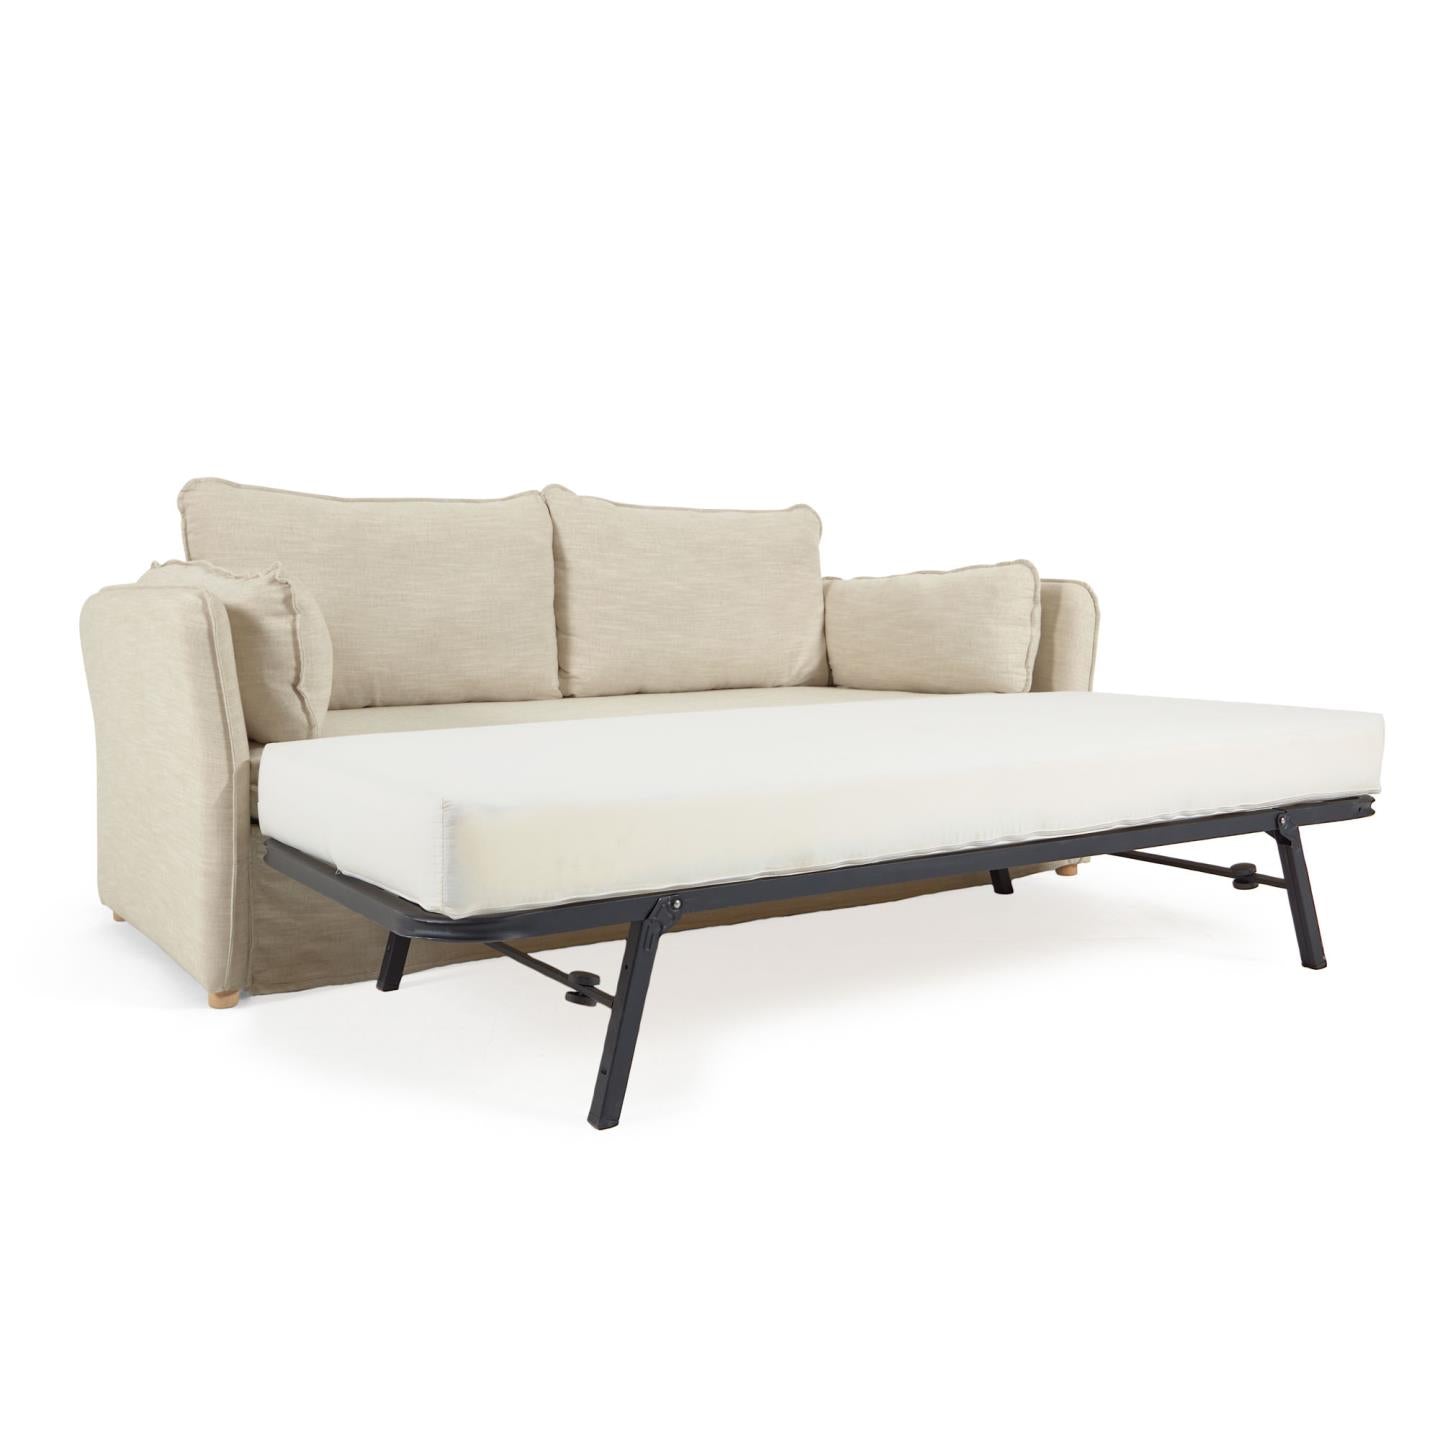 Tanit sofa bed in white with natural finish solid beech wood legs, 210 cm